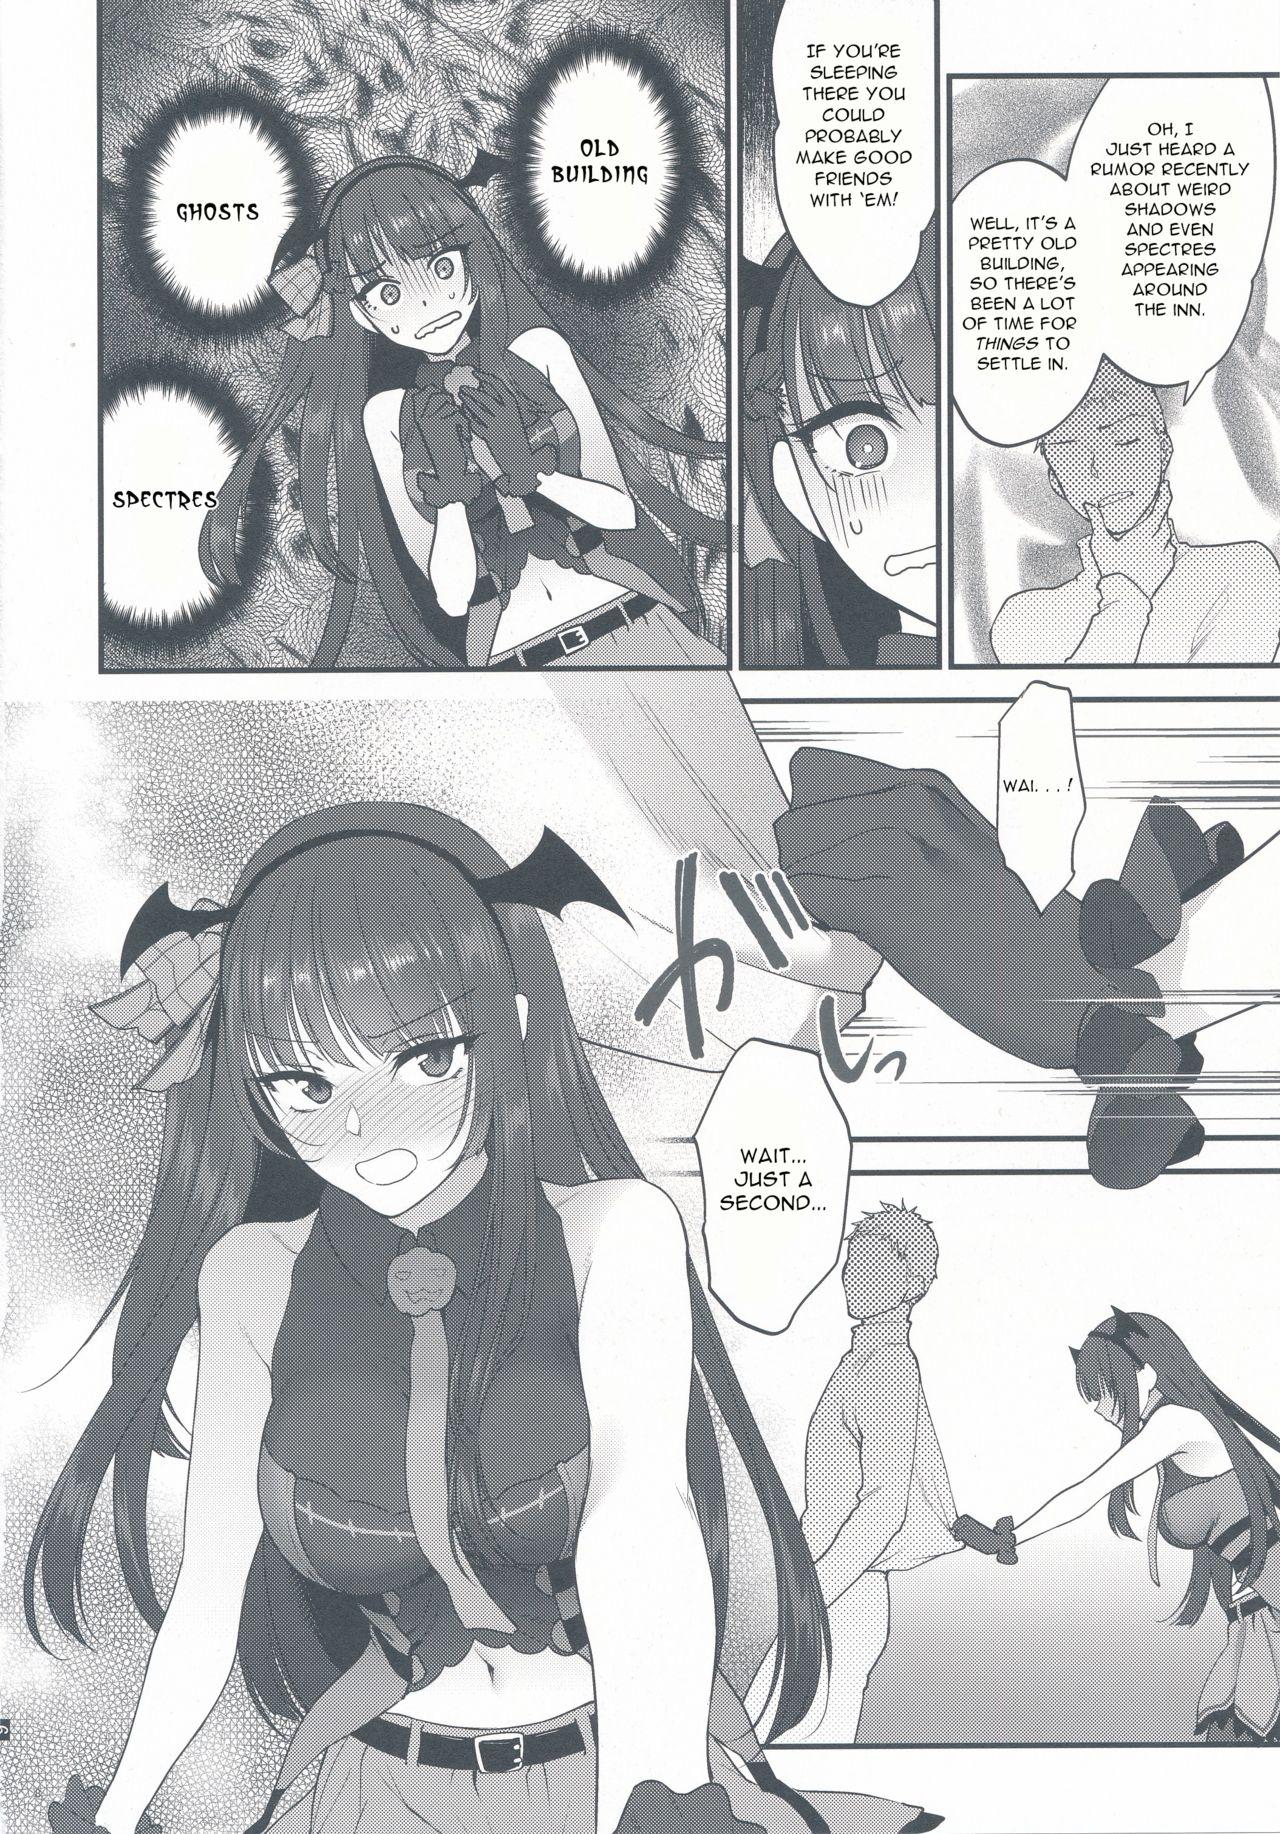 Best Blowjobs Obake nante Inai! - Girls frontline Pussyeating - Page 8